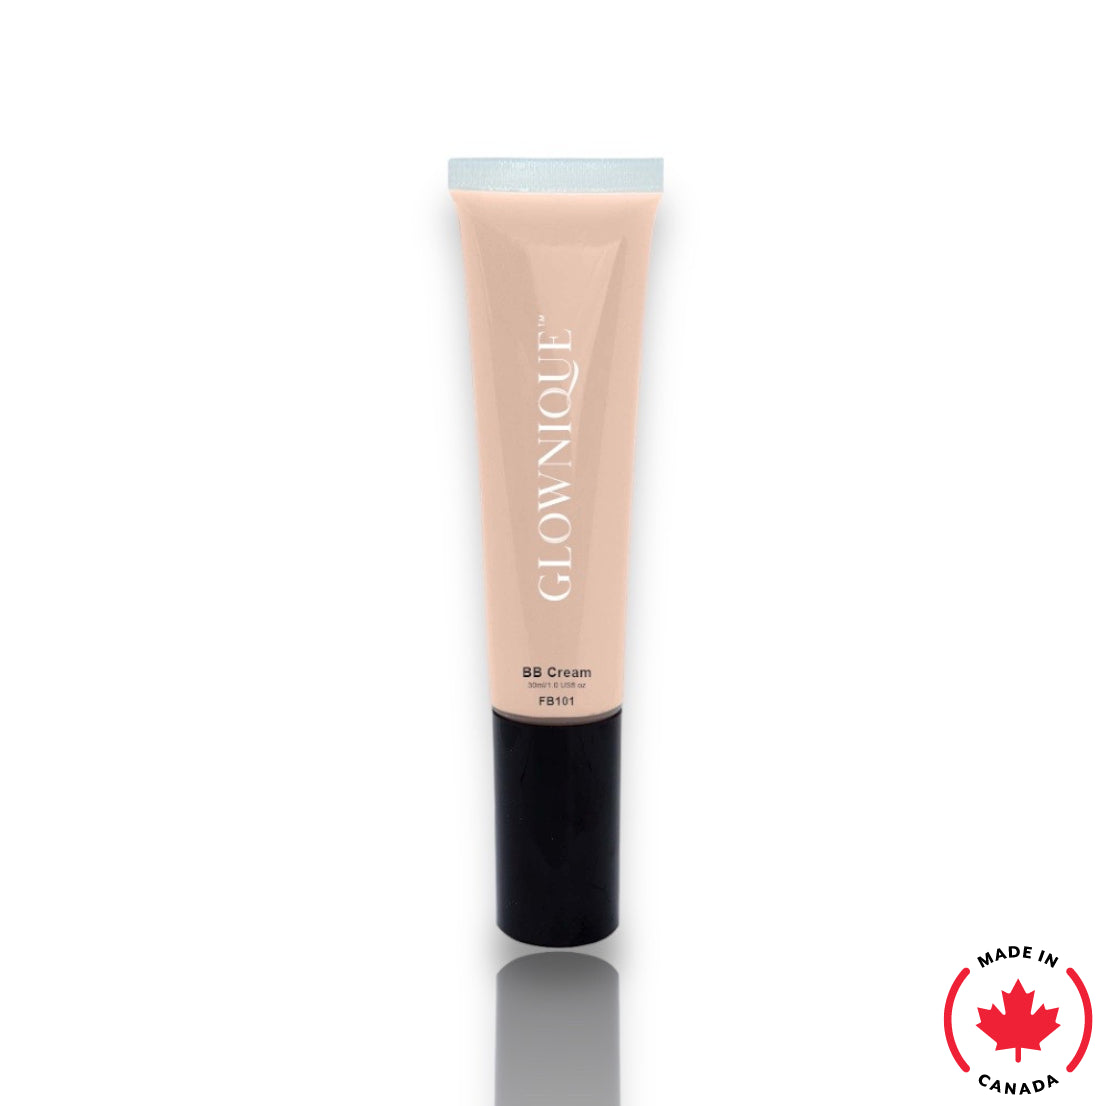 BB Cream with SPF - Pearly | GLOWNIQUE